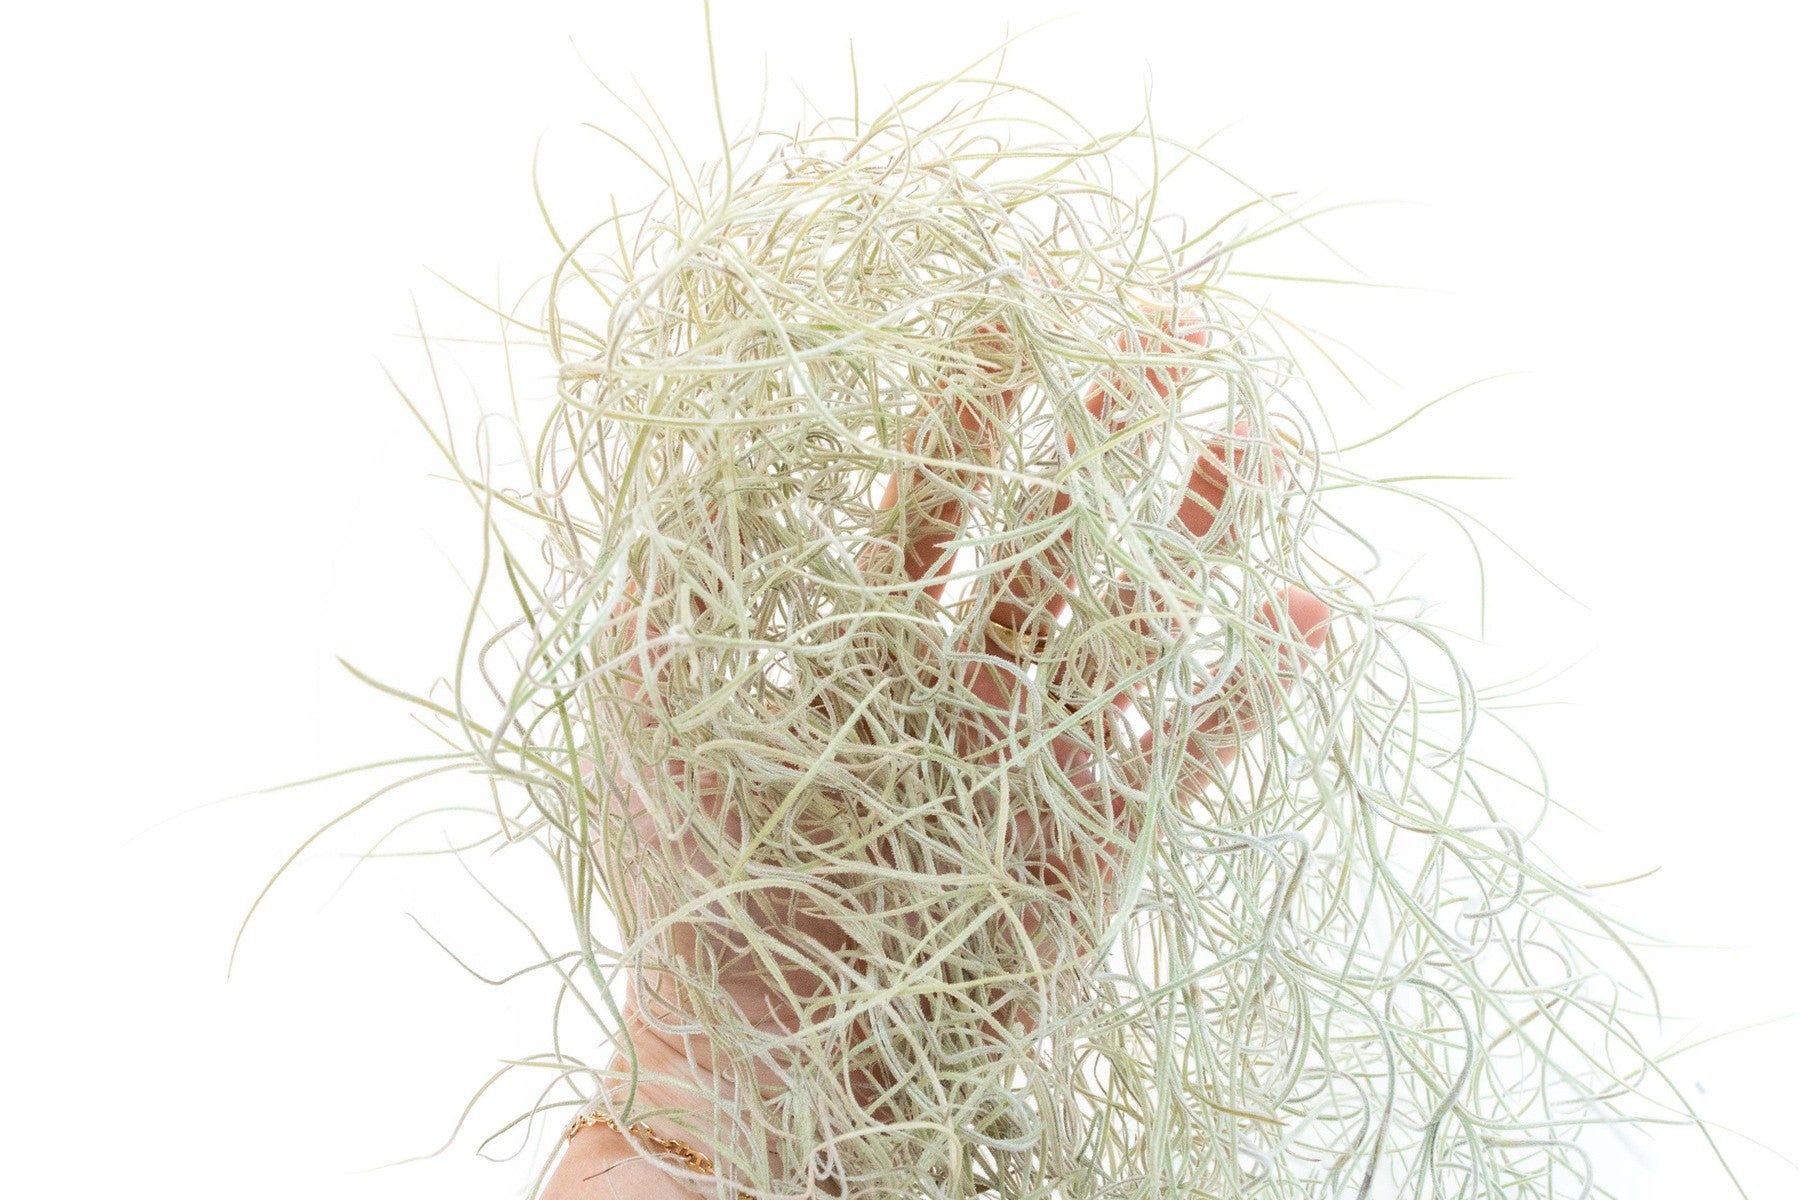 SALE - Tillandsia Guatemala Gray Spanish Moss - 1 Foot Clumps - Set of 3 or 6 Strands - 40% Off-airplant-The Succulent Source